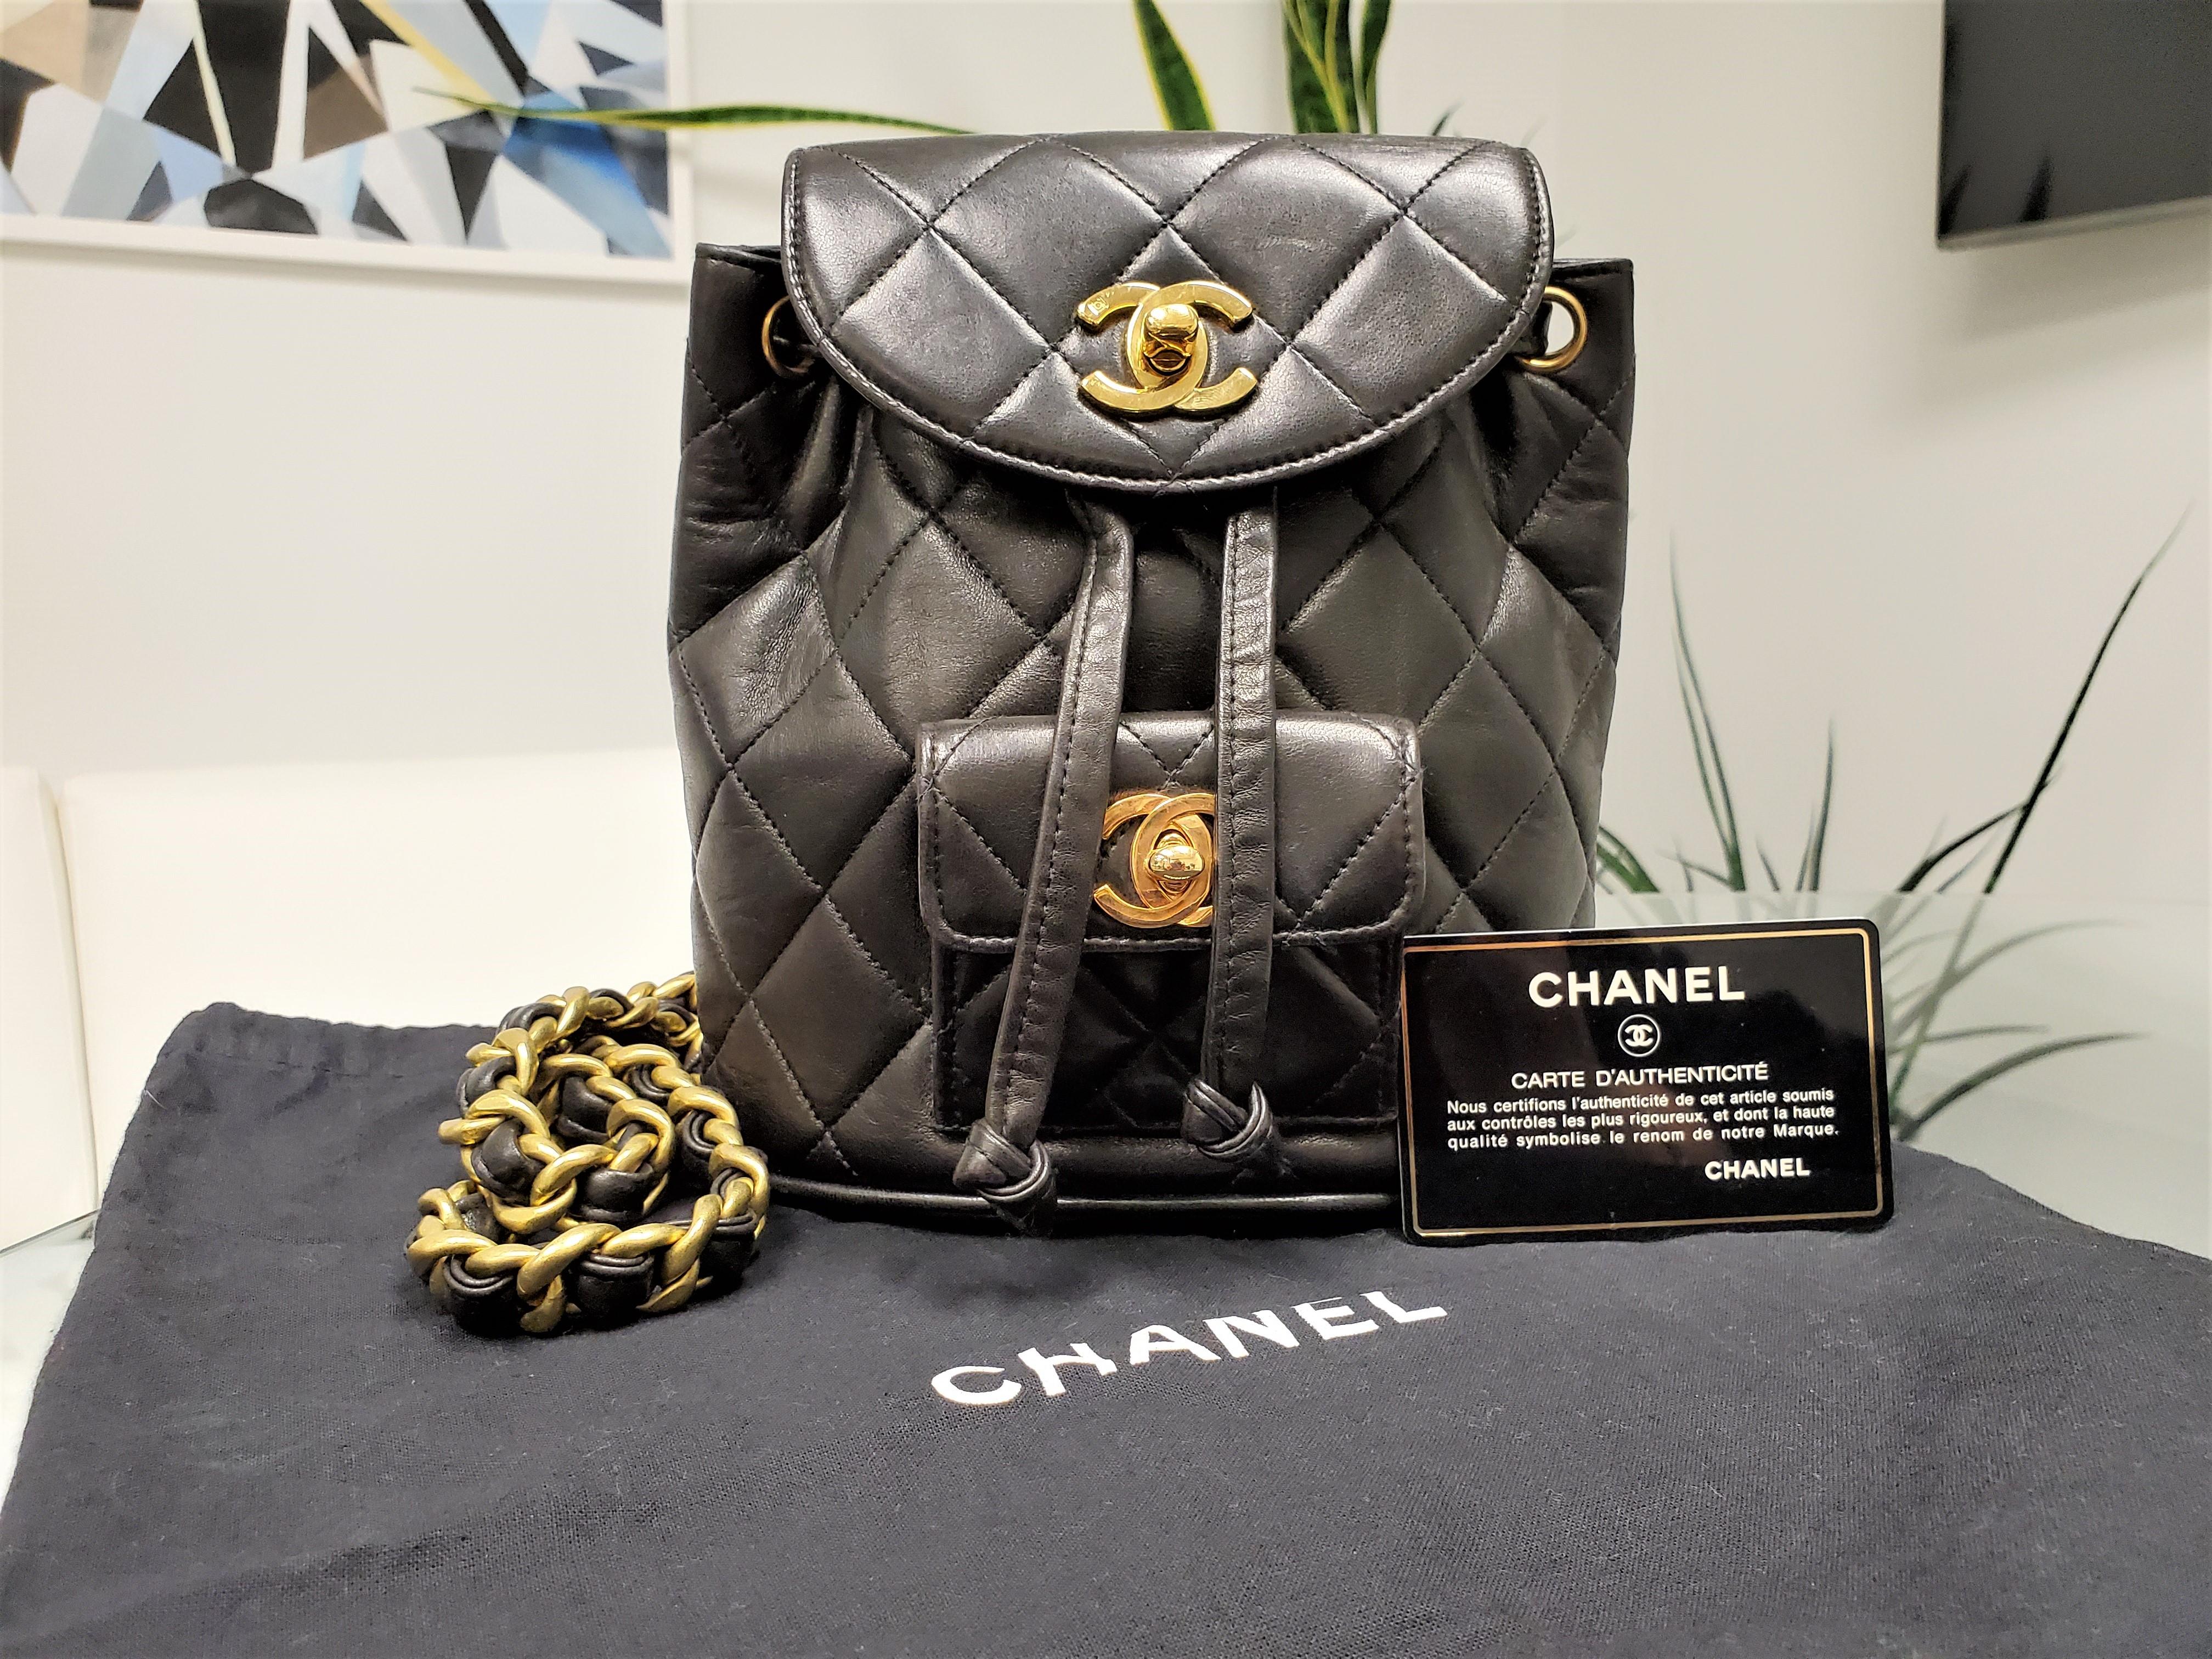 Brand - Chanel
Collection - Duma
Primary Material - Black quilted lambskin leather
Hardware - Antique goldtone
Pockets - One small exterior flap pocket
Interior - Black lambskin leather
Strap - Extra thick CC gold backpack chains with leather
Origin